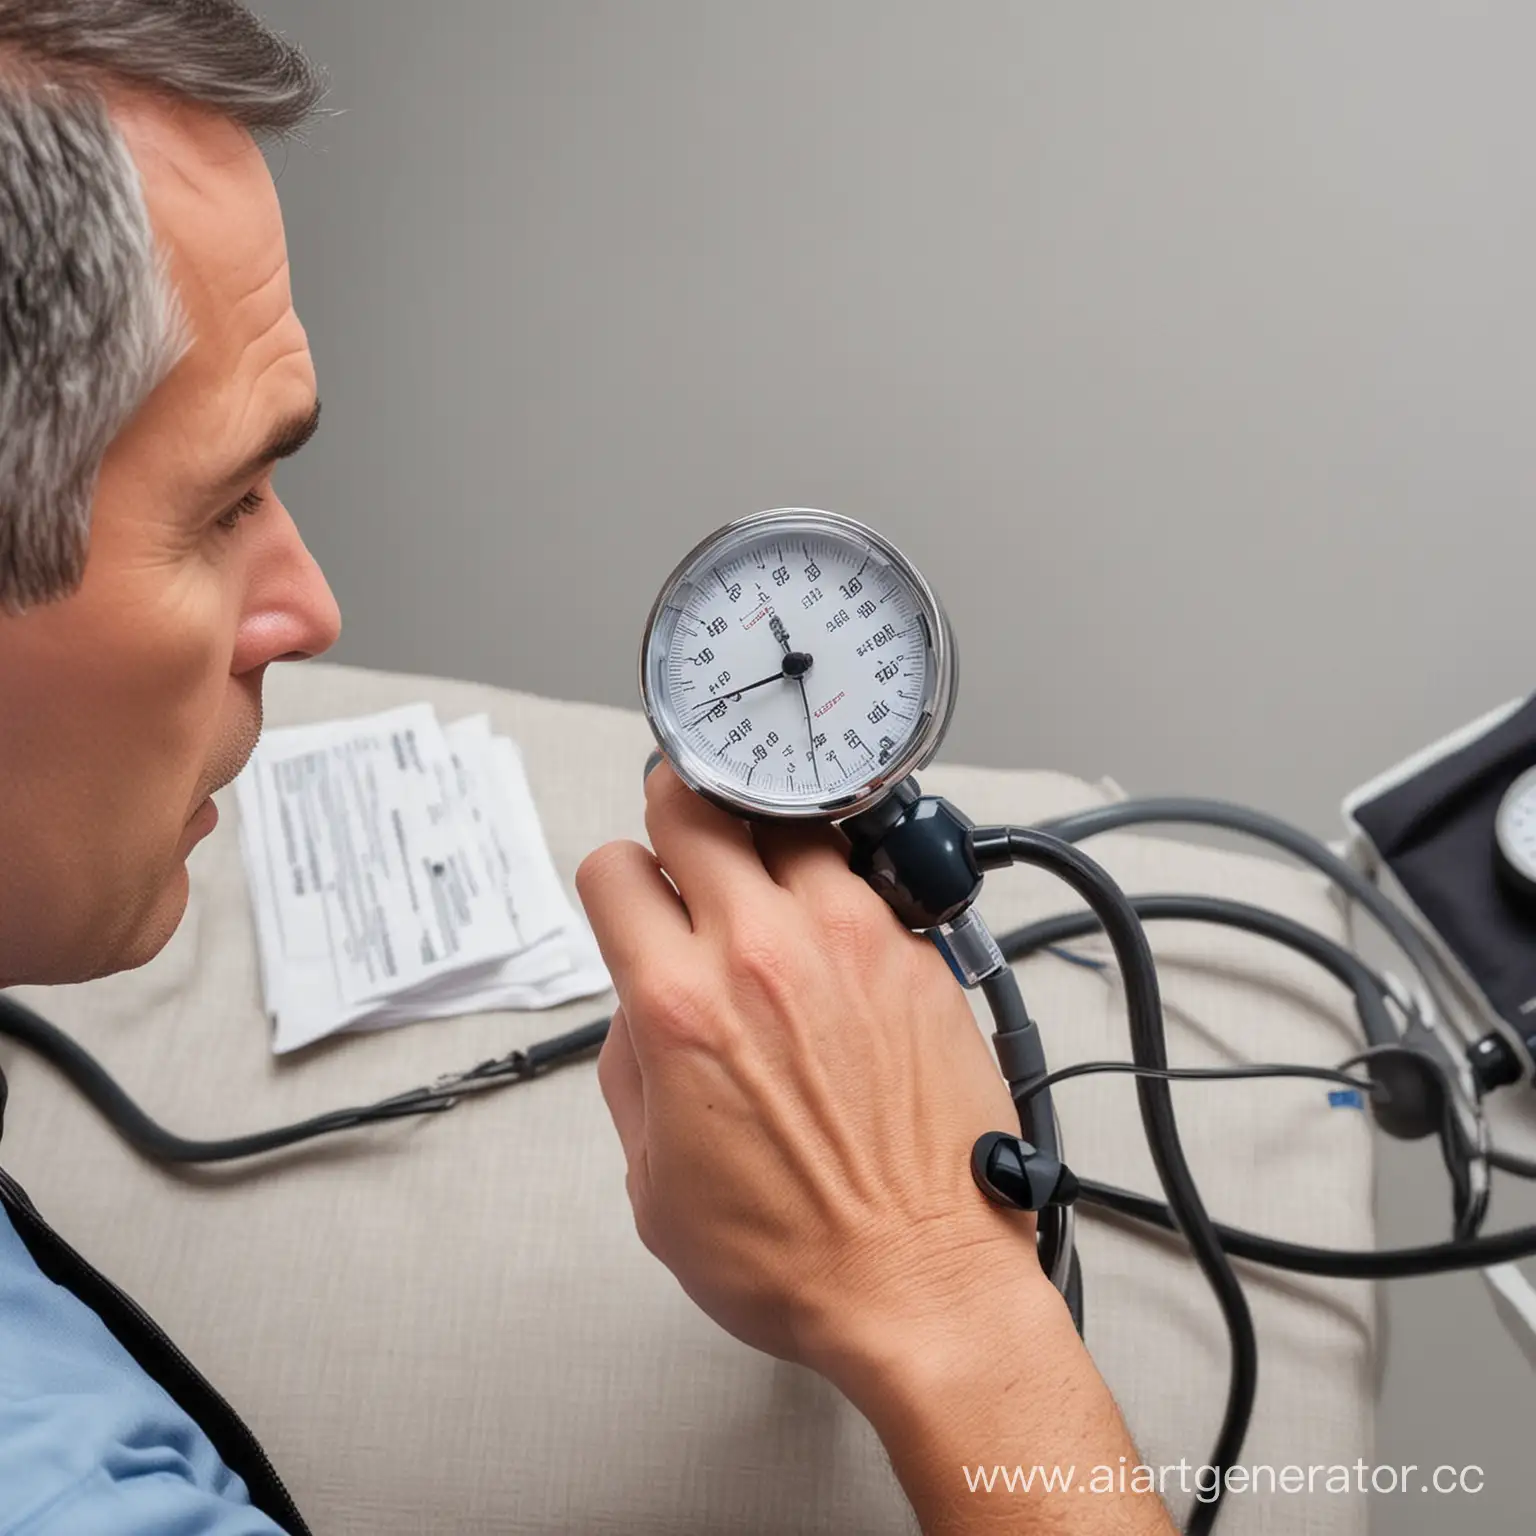 Adult-with-Healthy-Lifestyle-Managing-Hypertension